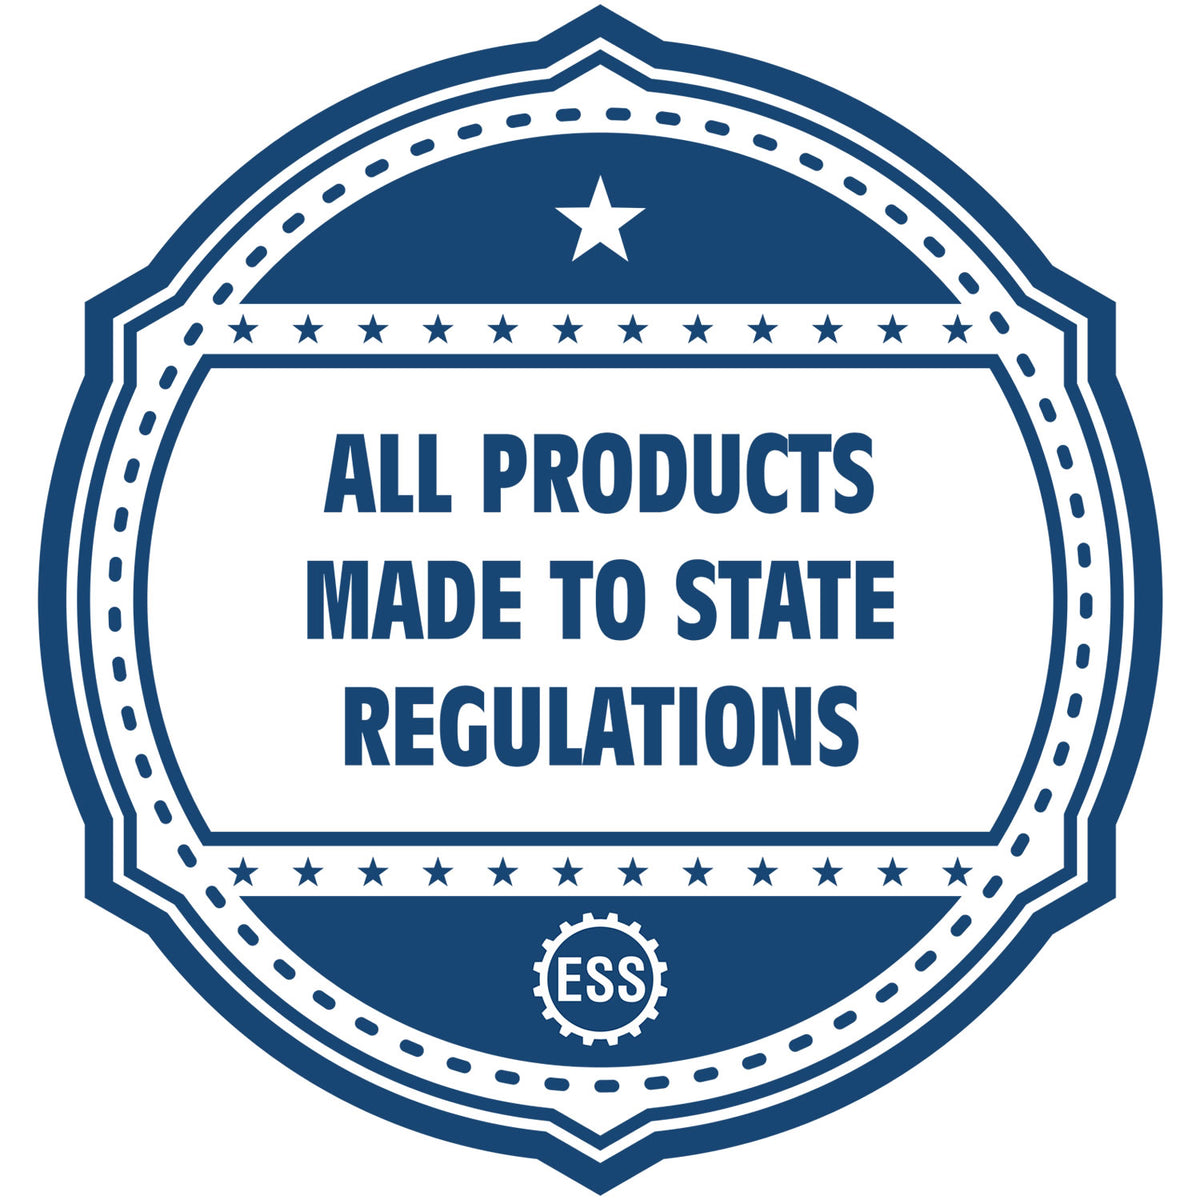 An icon or badge element for the Heavy Duty Cast Iron District of Columbia Engineer Seal Embosser showing that this product is made in compliance with state regulations.